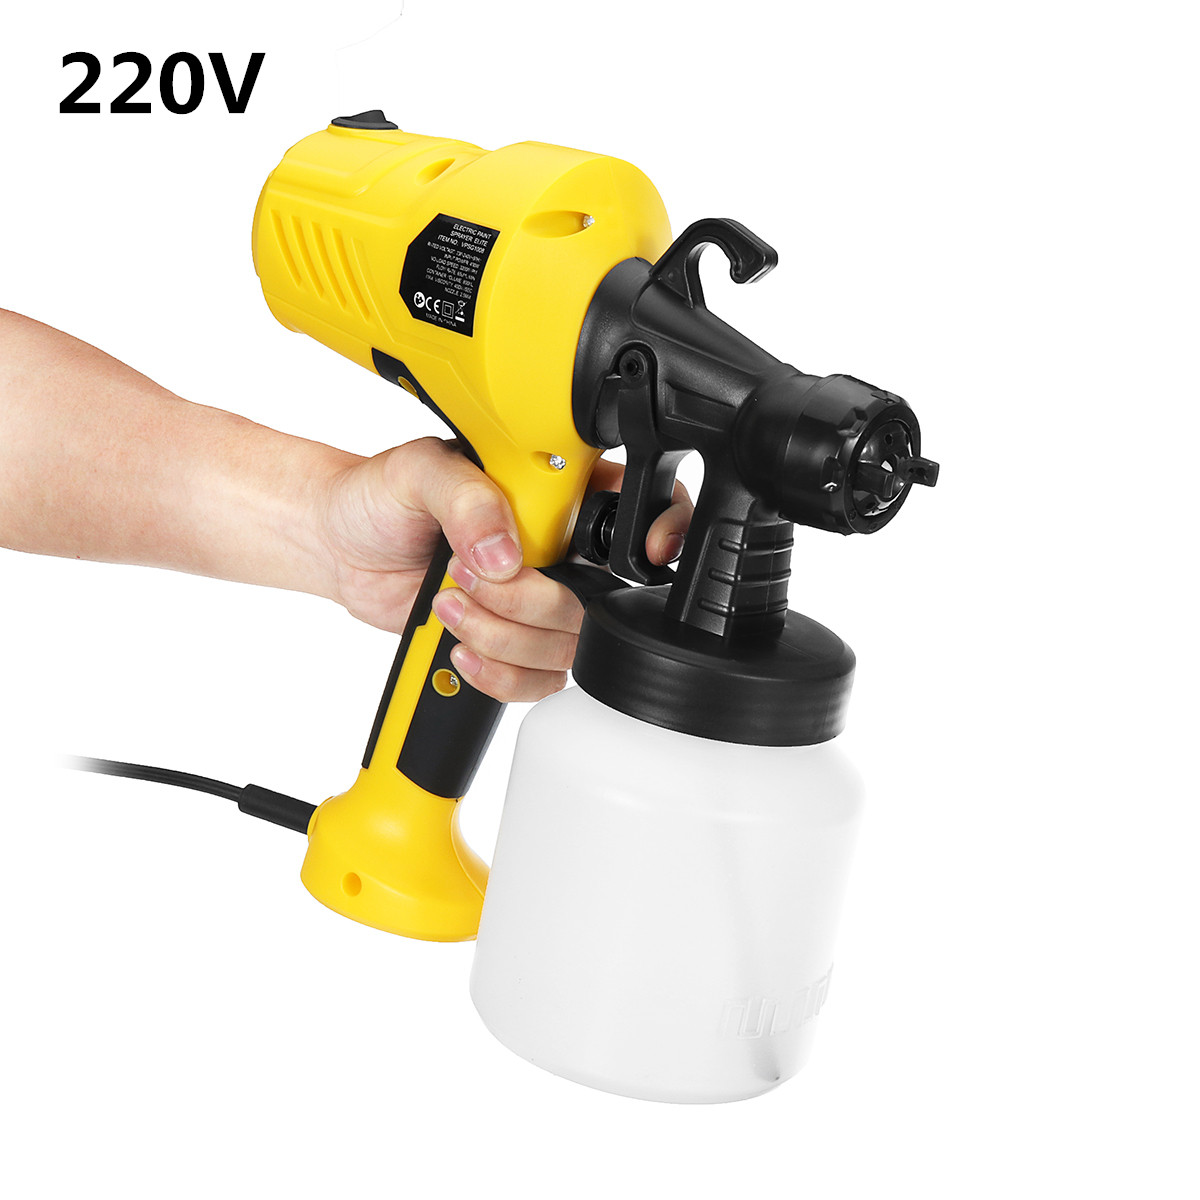 600W Electric Spray Paint Sprayer For Cars Wood Furniture Wall Woodworking 27